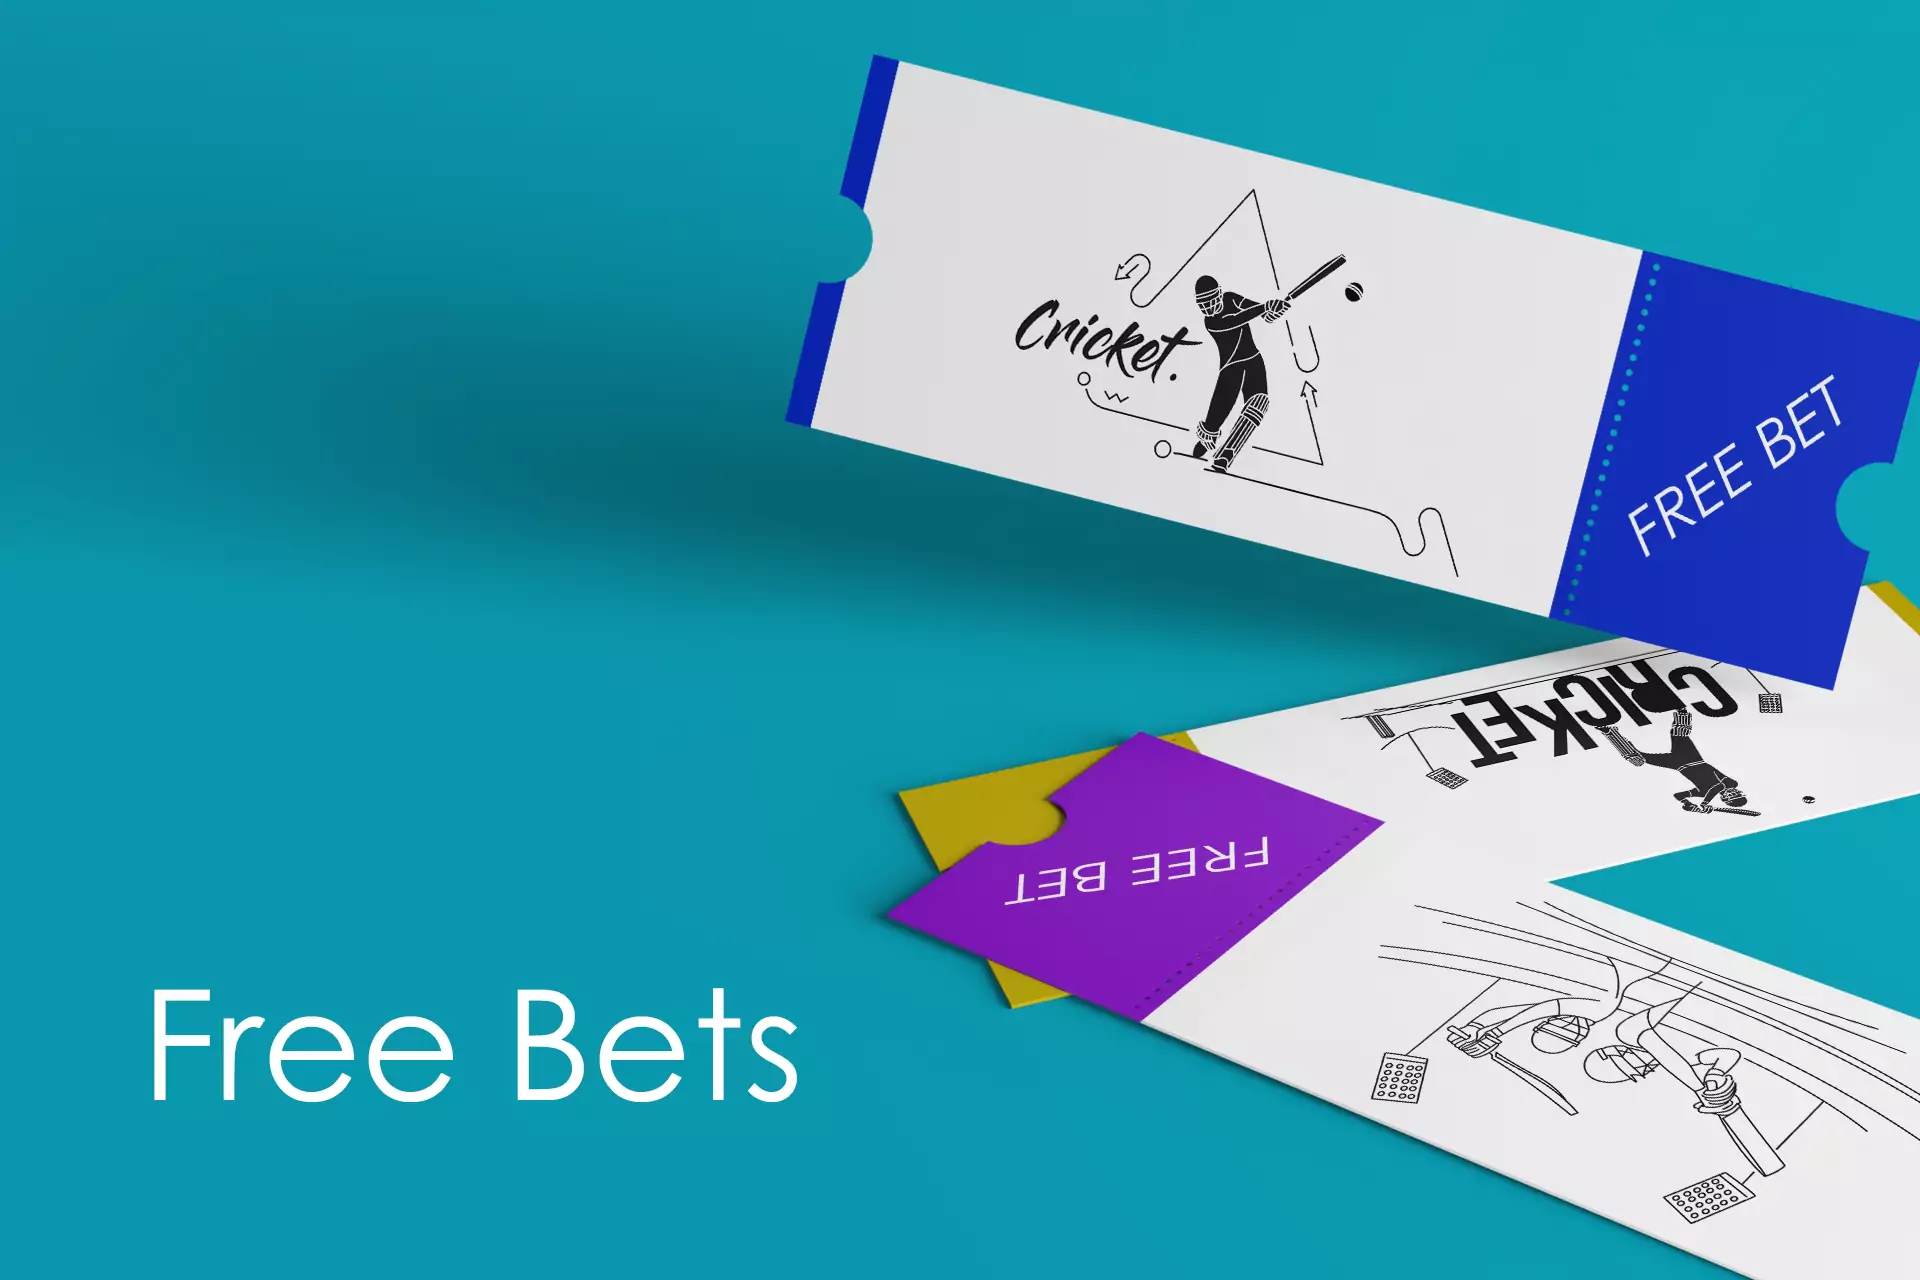 You can use INR free bets to bet on cricket.